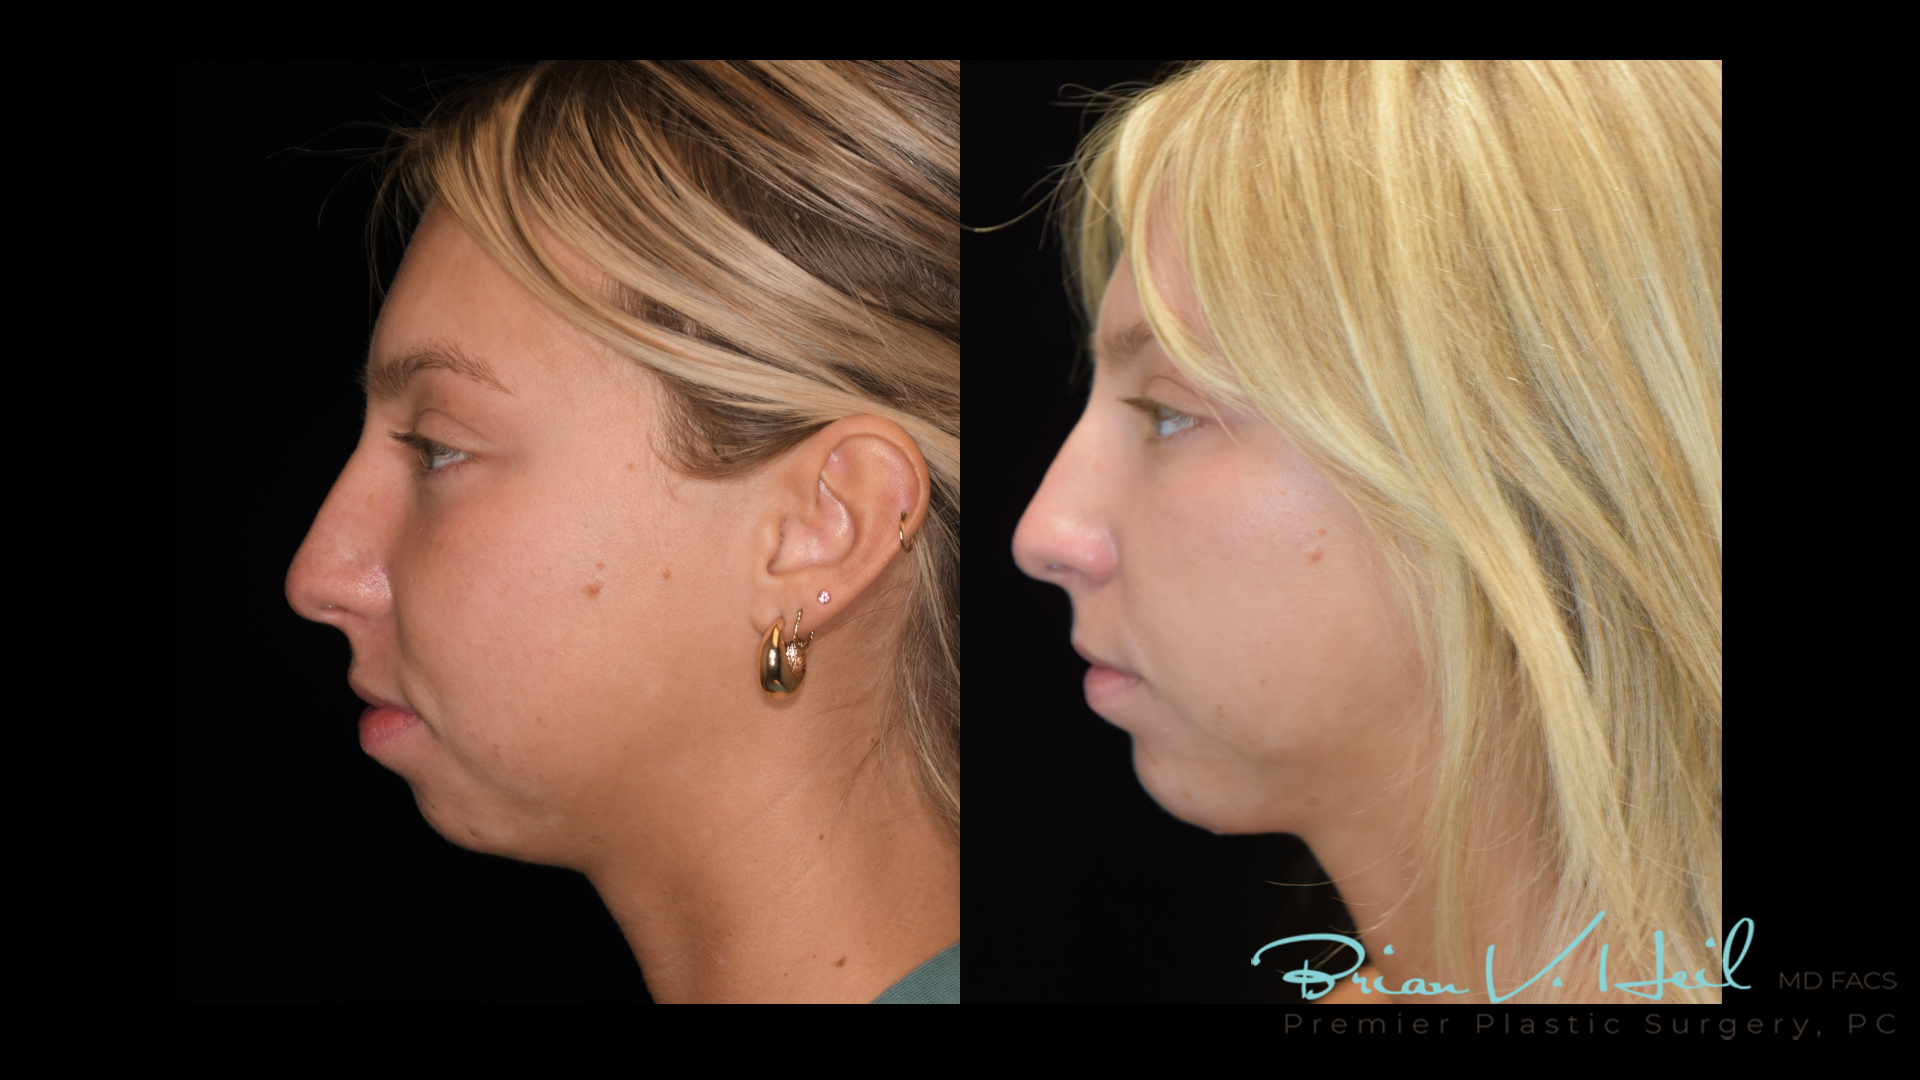 Facial Implants Pittsburgh